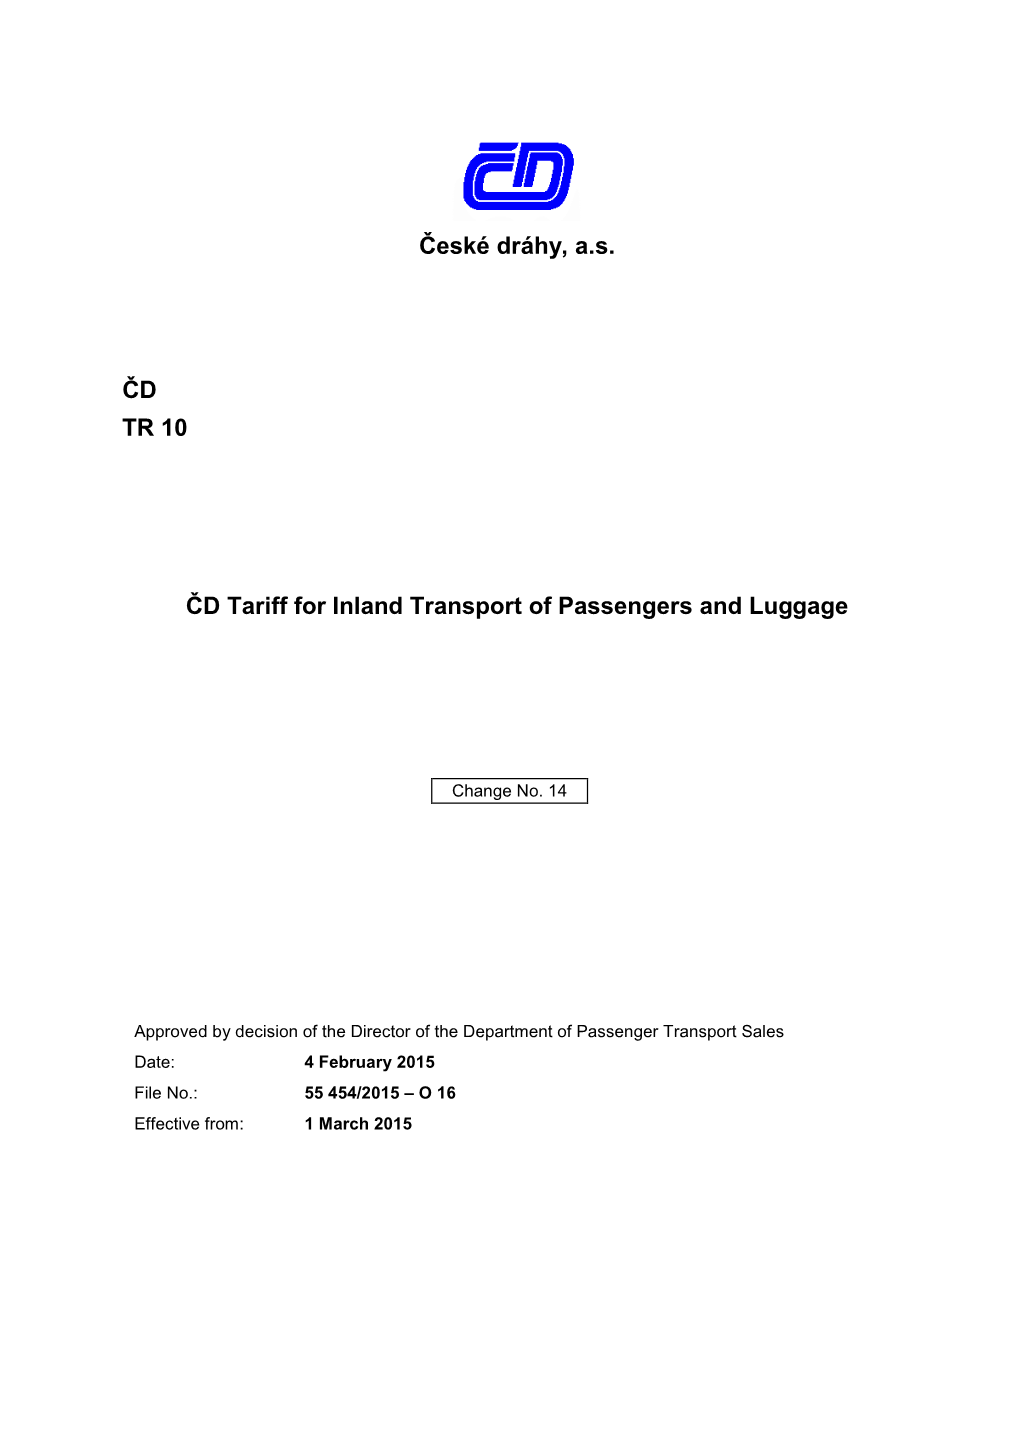 ČD Tariff for Inland Transport of Passengers and Luggage